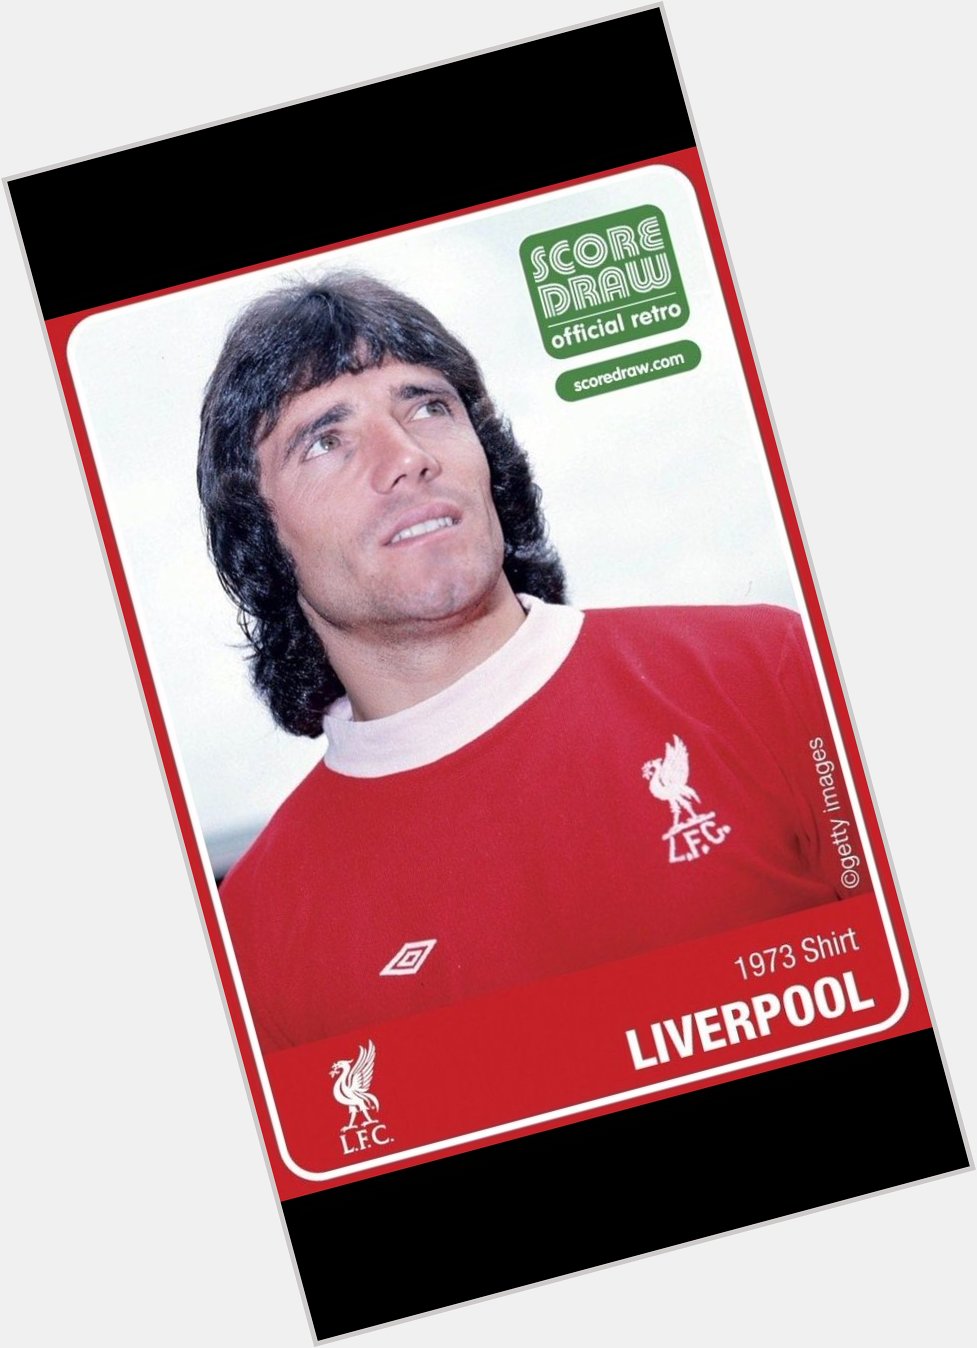 Happy Birthday today to Liverpool Legend and true Gent Kevin Keegan 